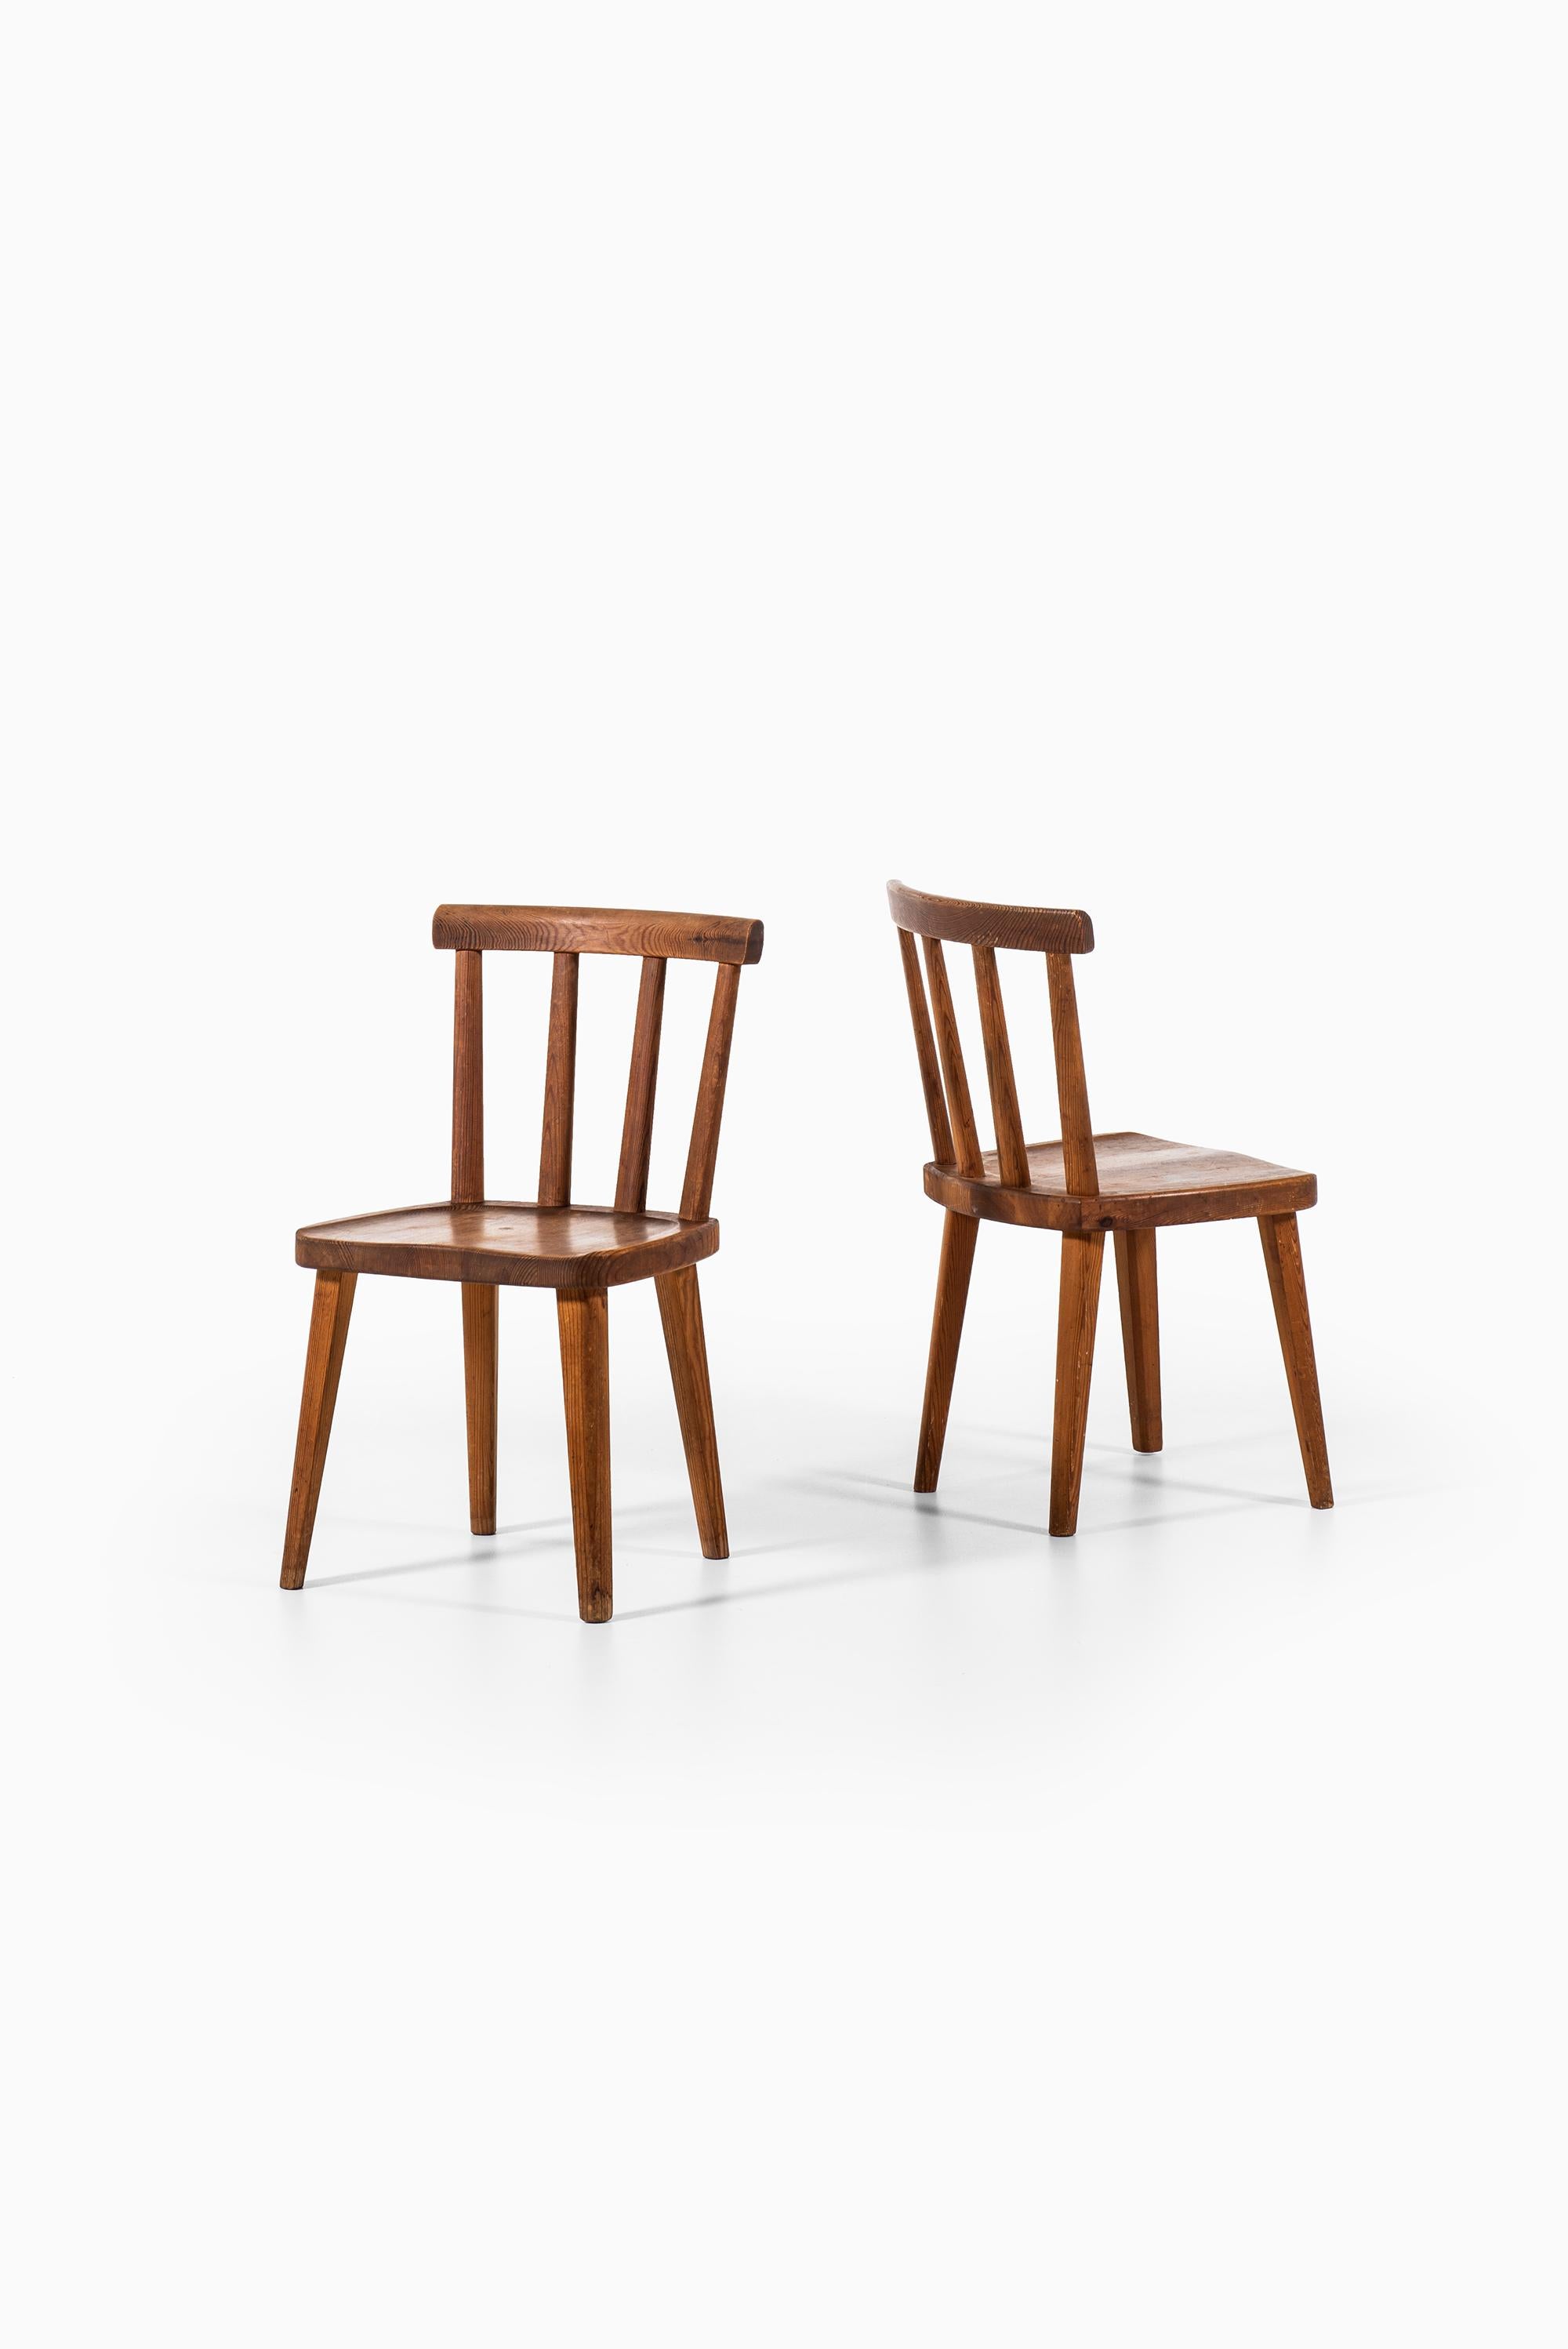 Rare set of 6 dining chairs model Utö designed by Axel Einar Hjorth. Produced by Nordiska Kompaniet in Sweden.